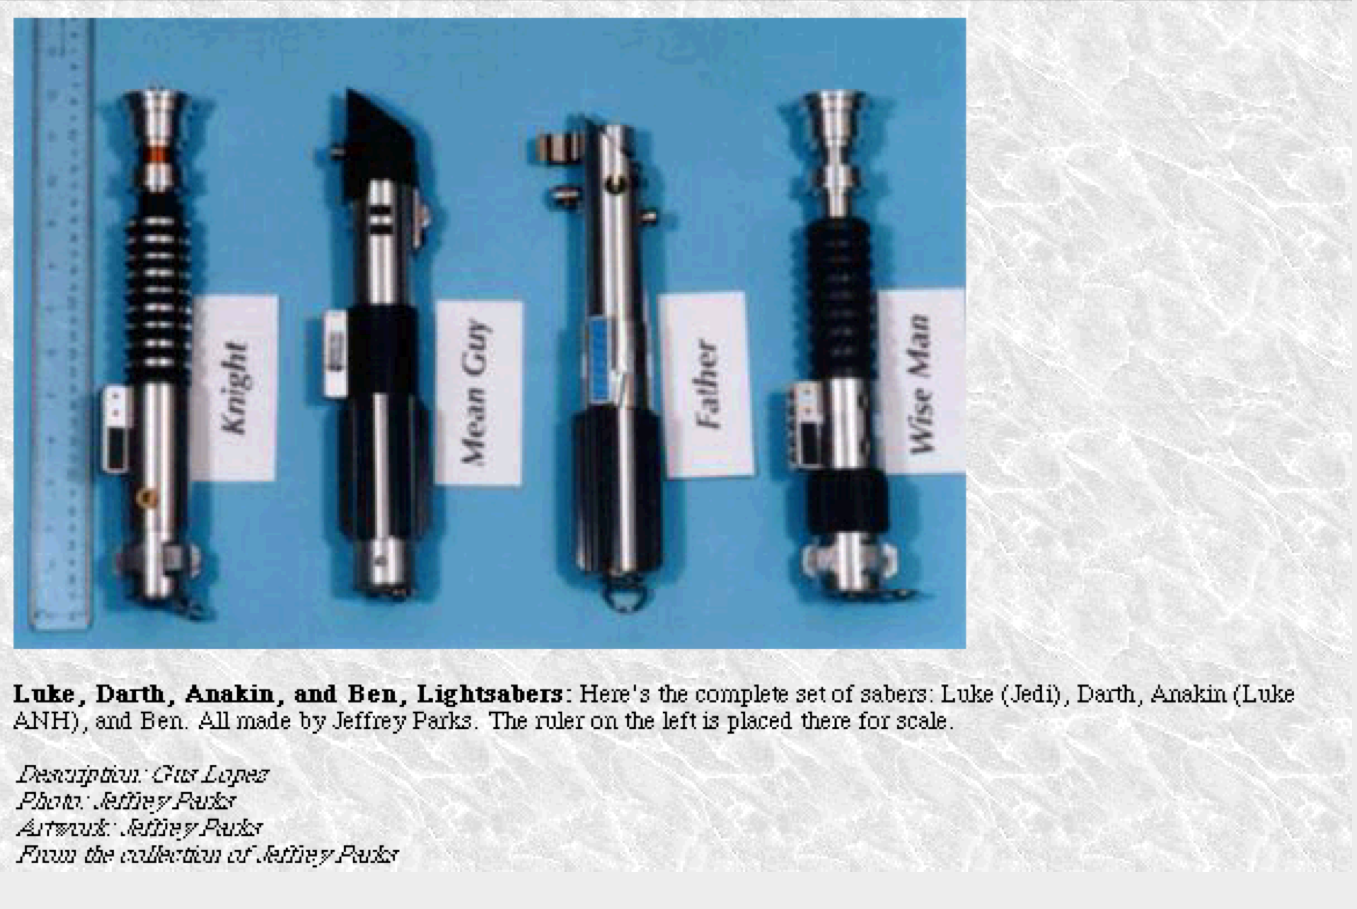 Parks lightsabers 11.15.96 a.png